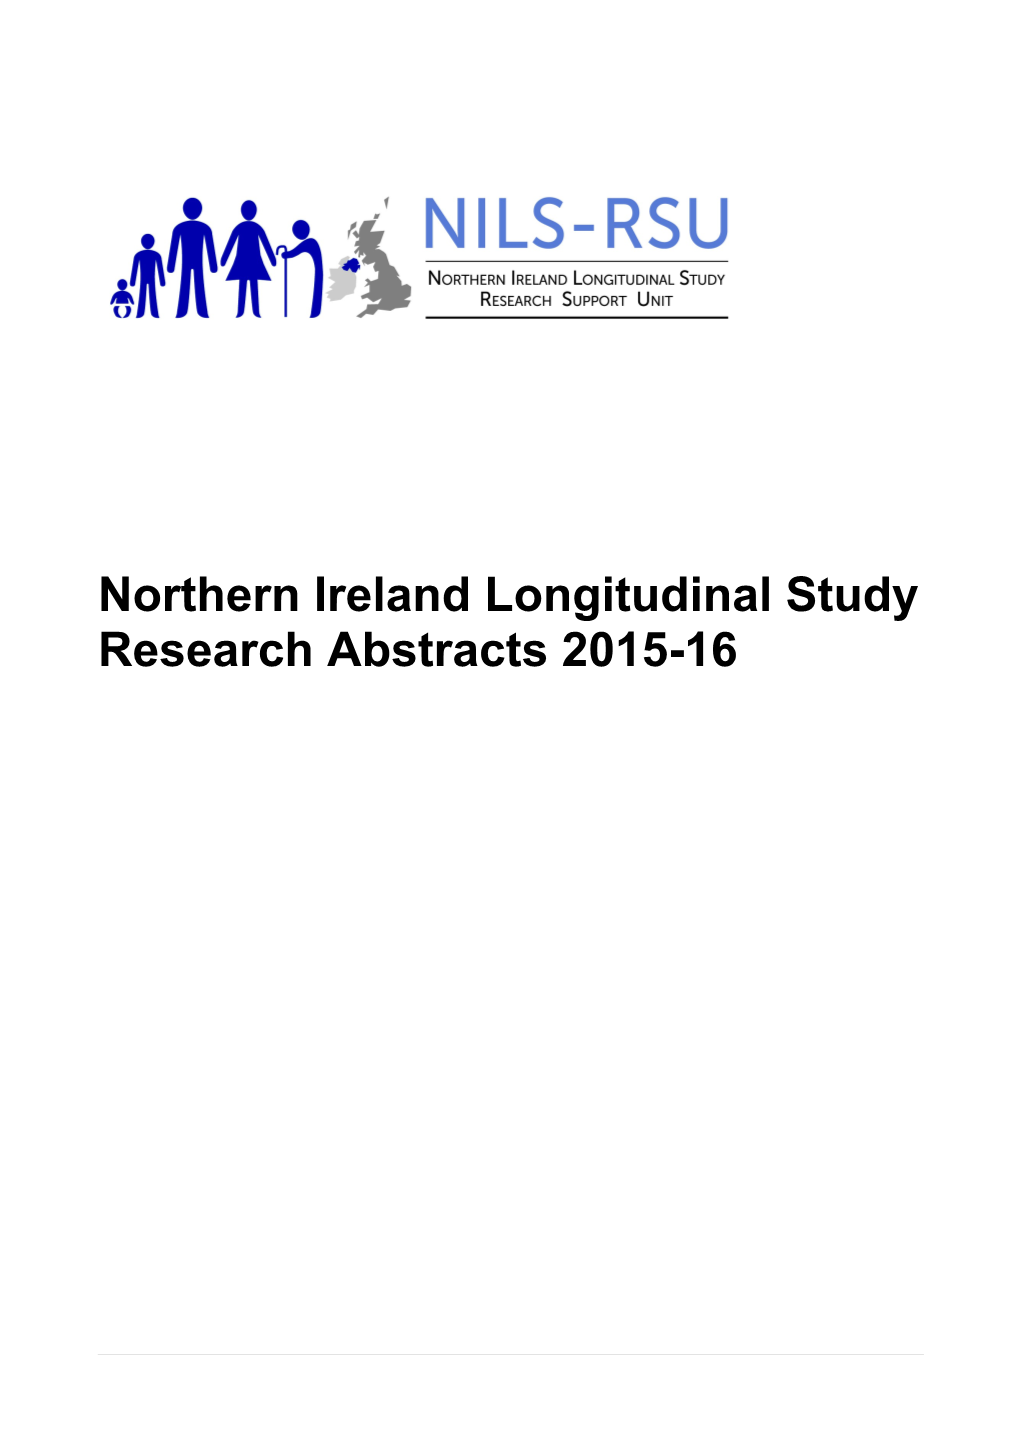 Northern Ireland Longitudinal Study Research Abstracts 2015-16